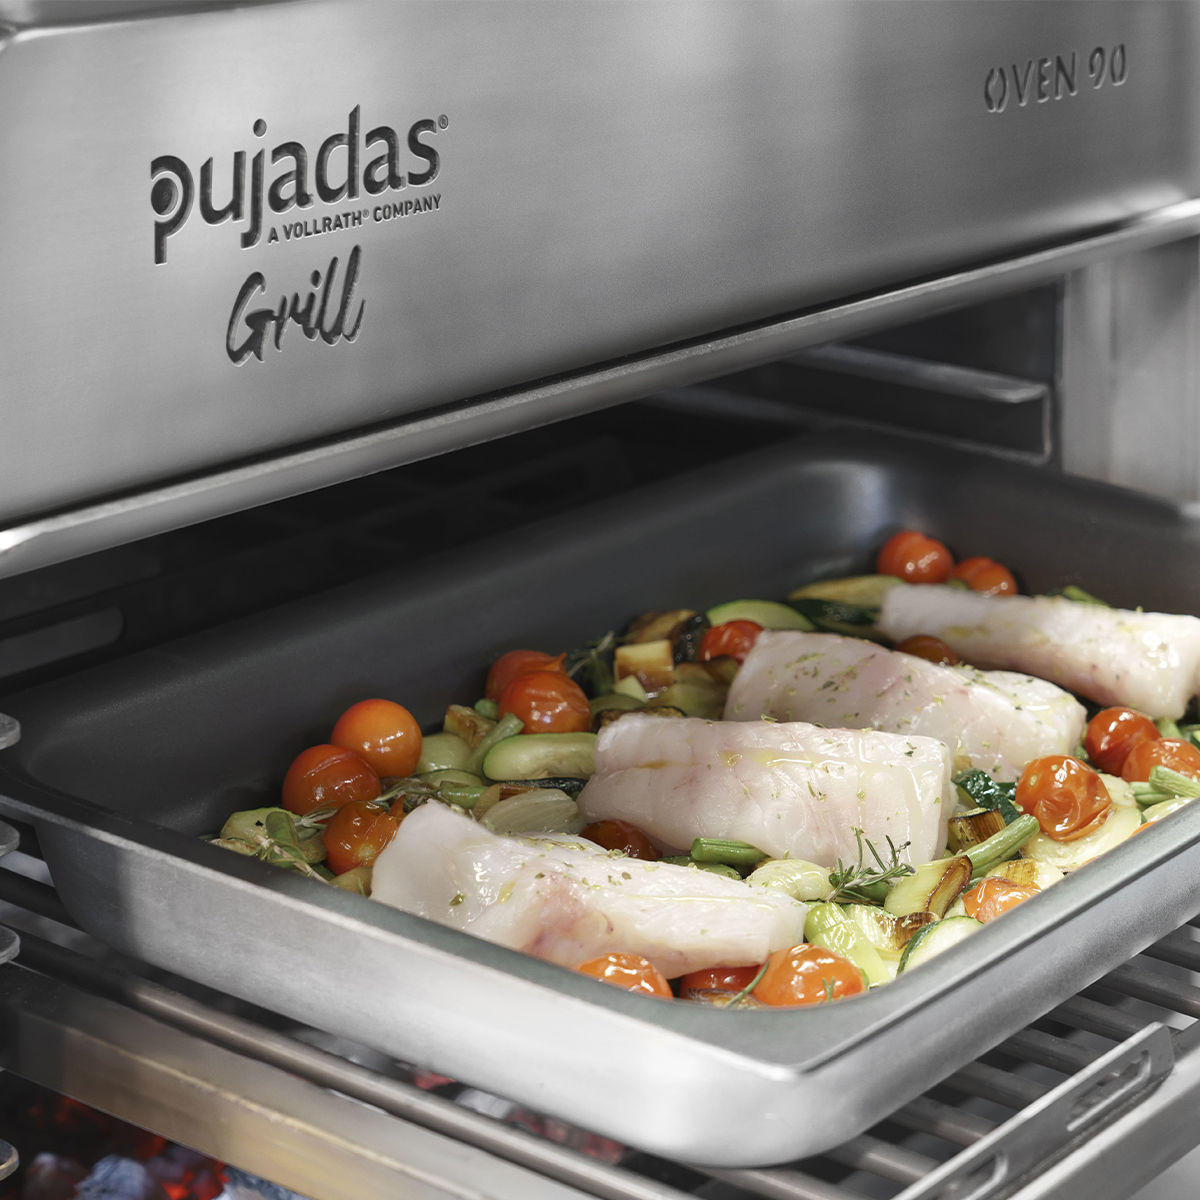 Pujadas Charcoal Countertop Oven 85090 cooking fish